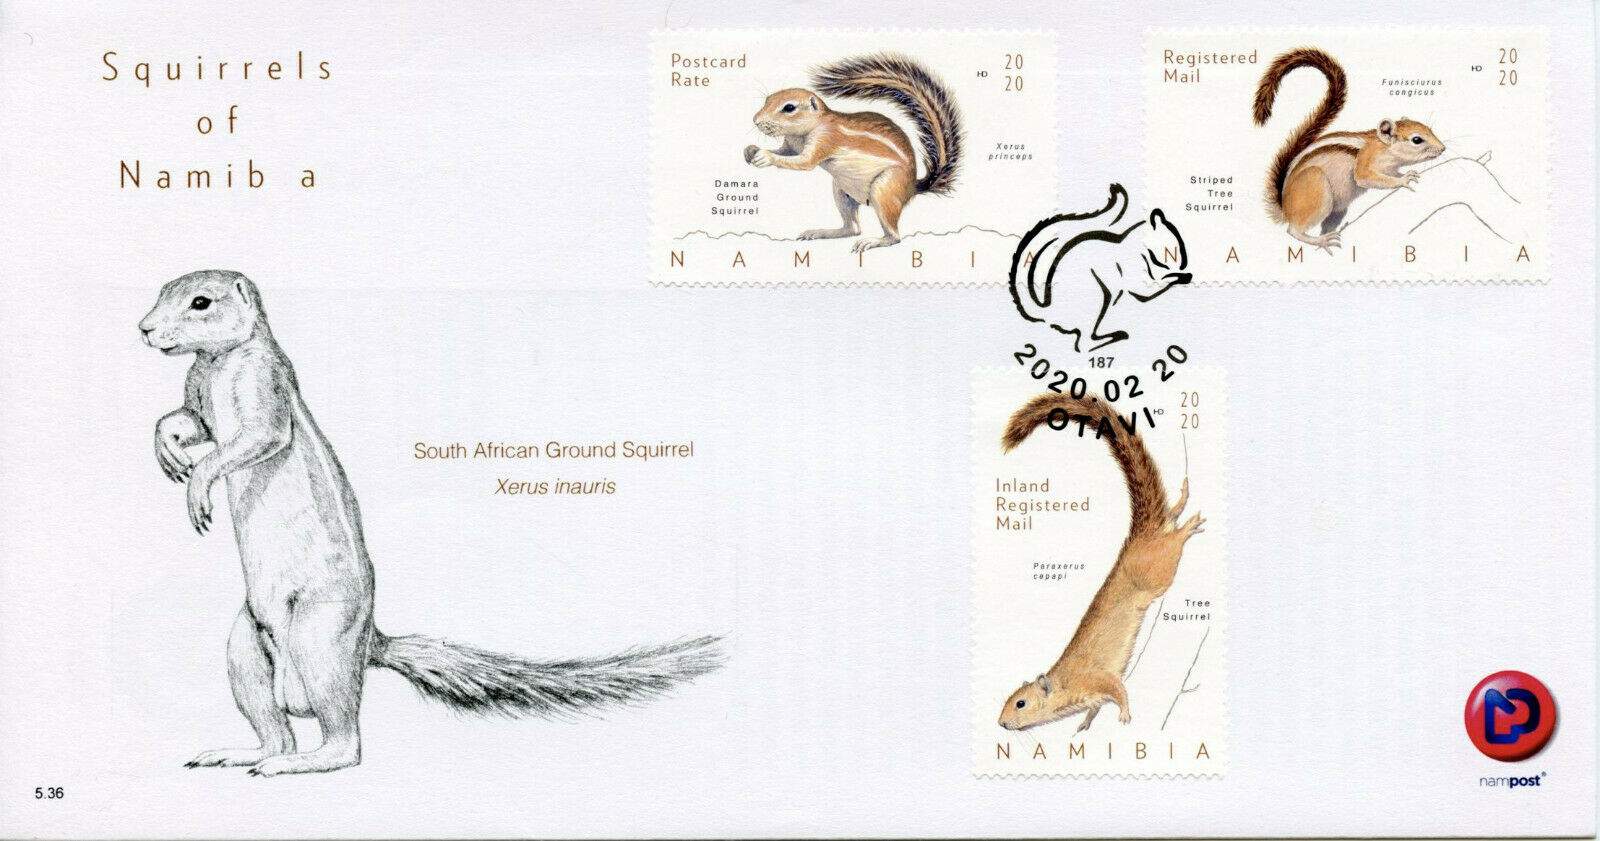 Namibia Wild Animals Stamps 2020 FDC Squirrels Tree Squirrel Fauna 3v Set